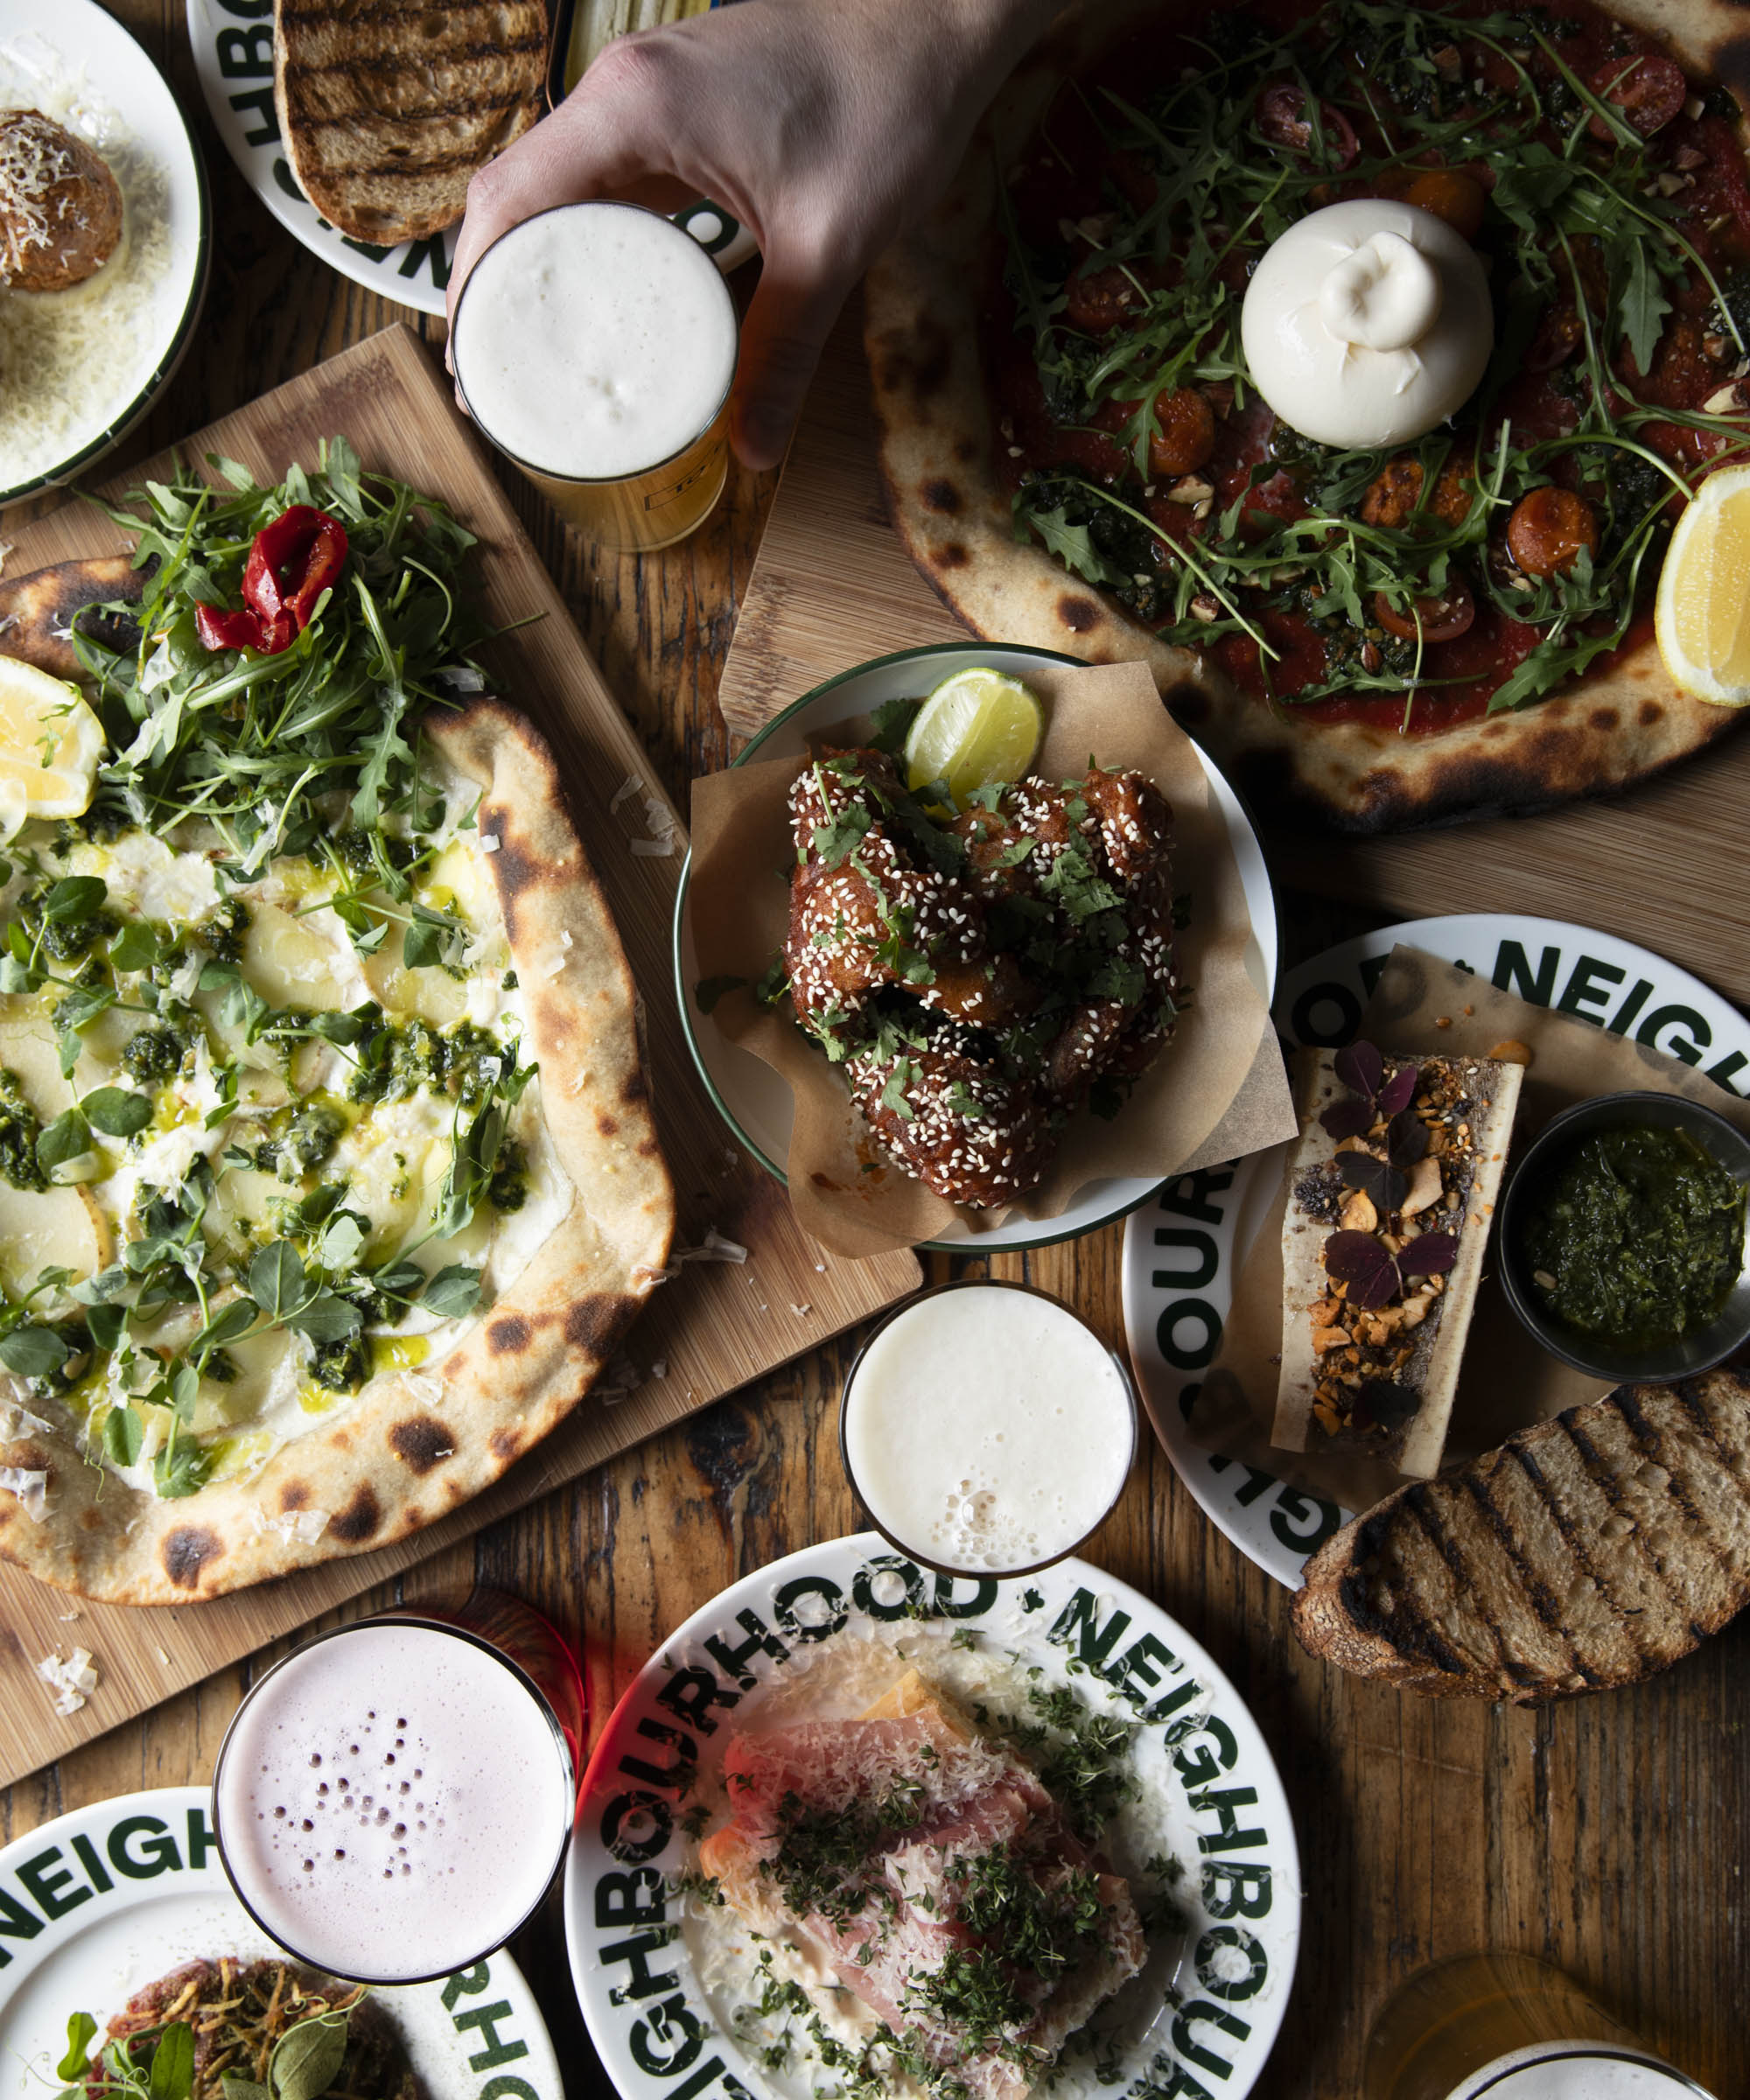 Pick whatever you like at Neighbourhood on Jægersborggade – After their recent revamp, this popular pizza place is now a killer craft beer bar, too